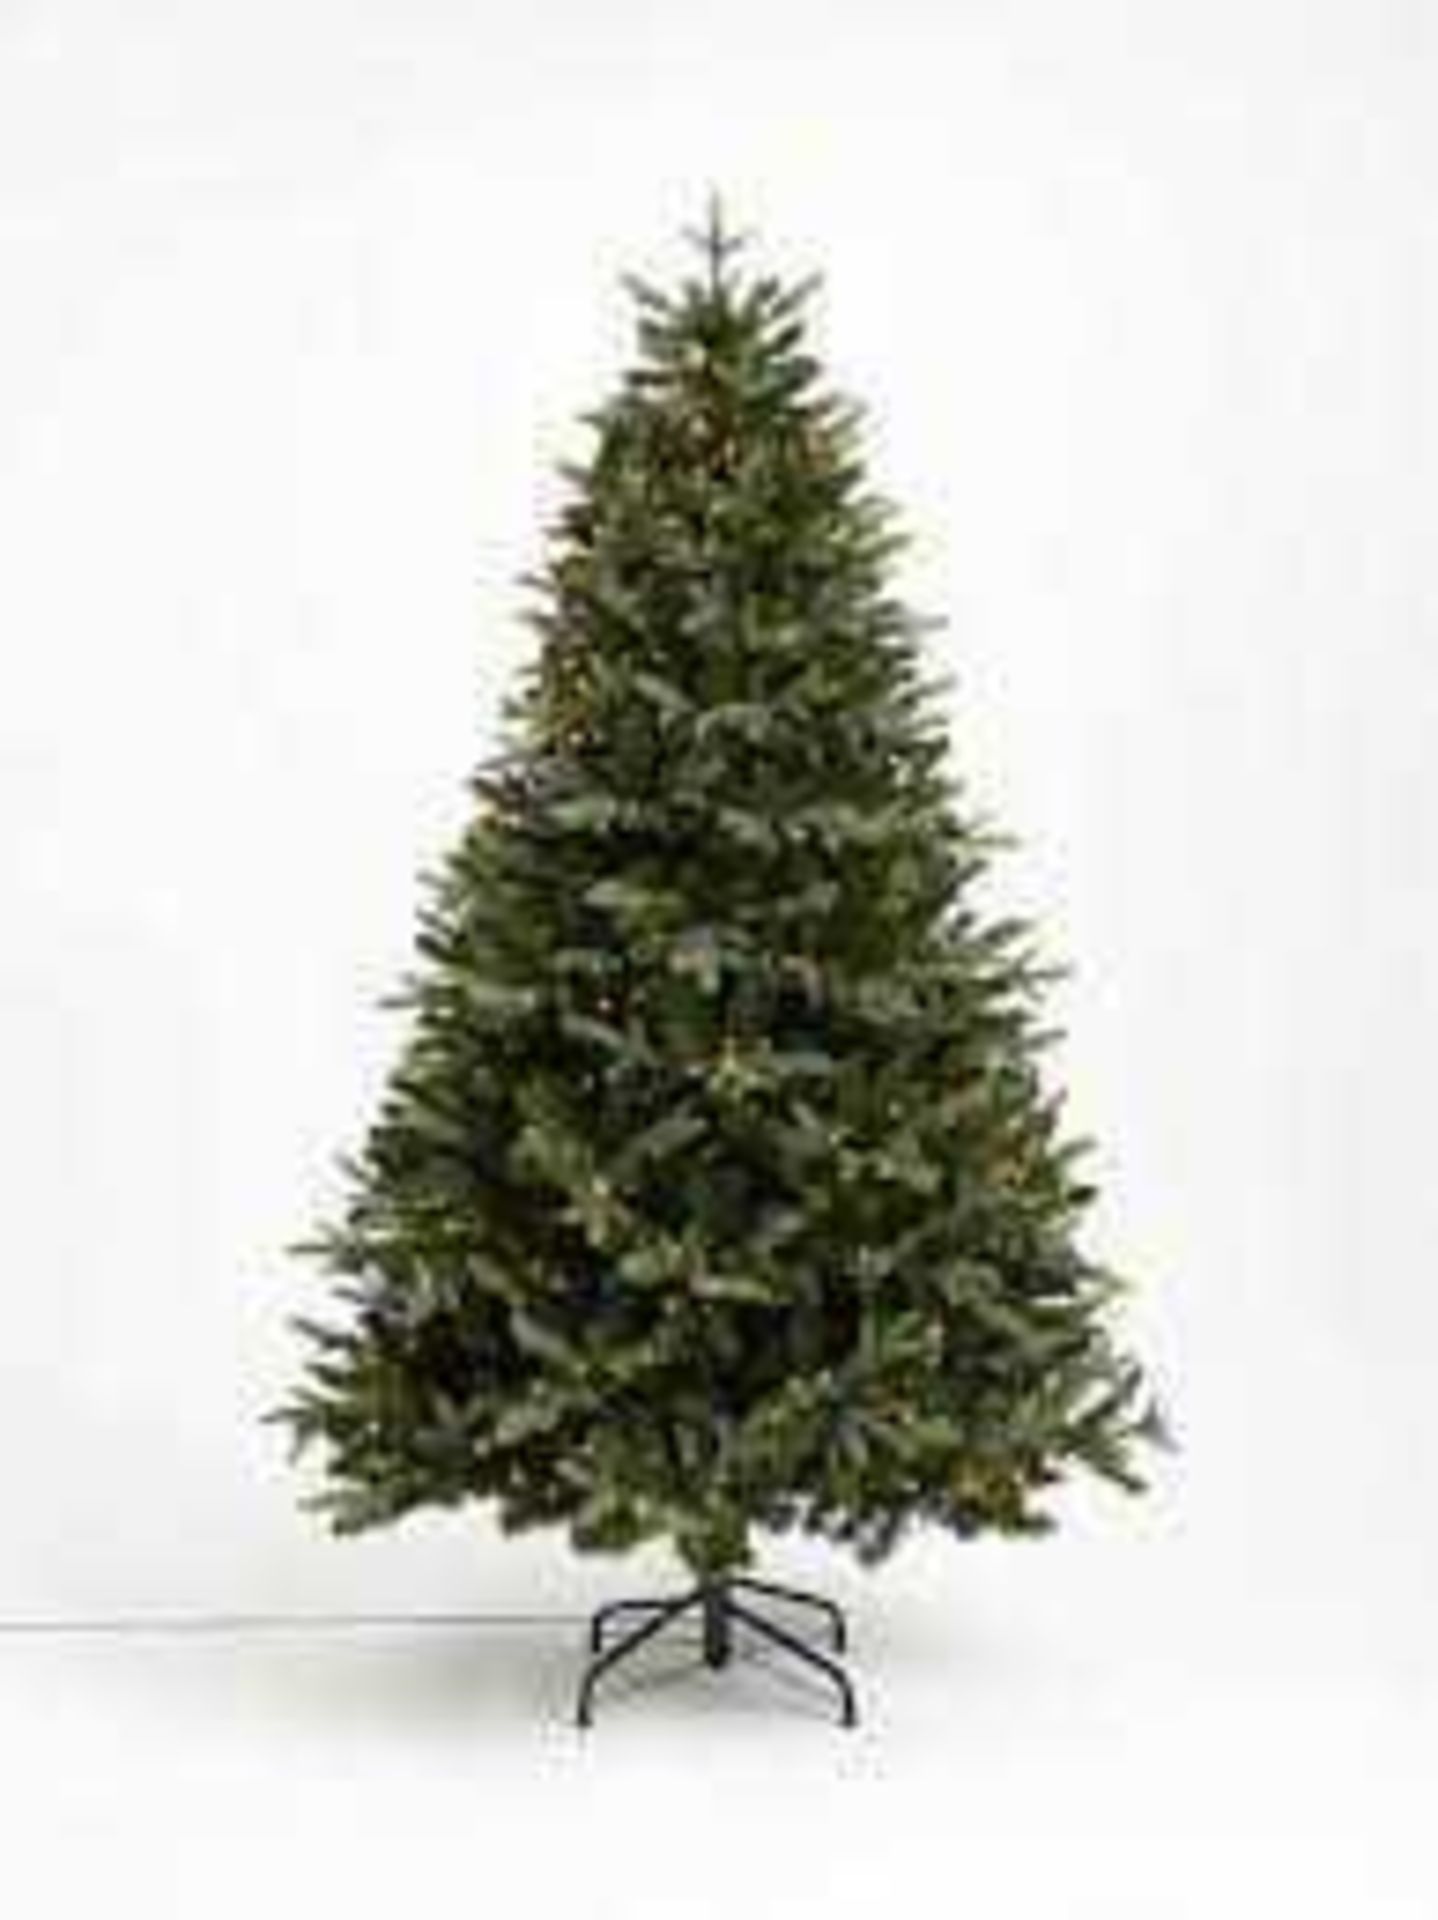 RRP £350 Boxed John Lewis And Partners Belgravia 7Ft Mains Operated Pre Lot Christmas Tree With 500